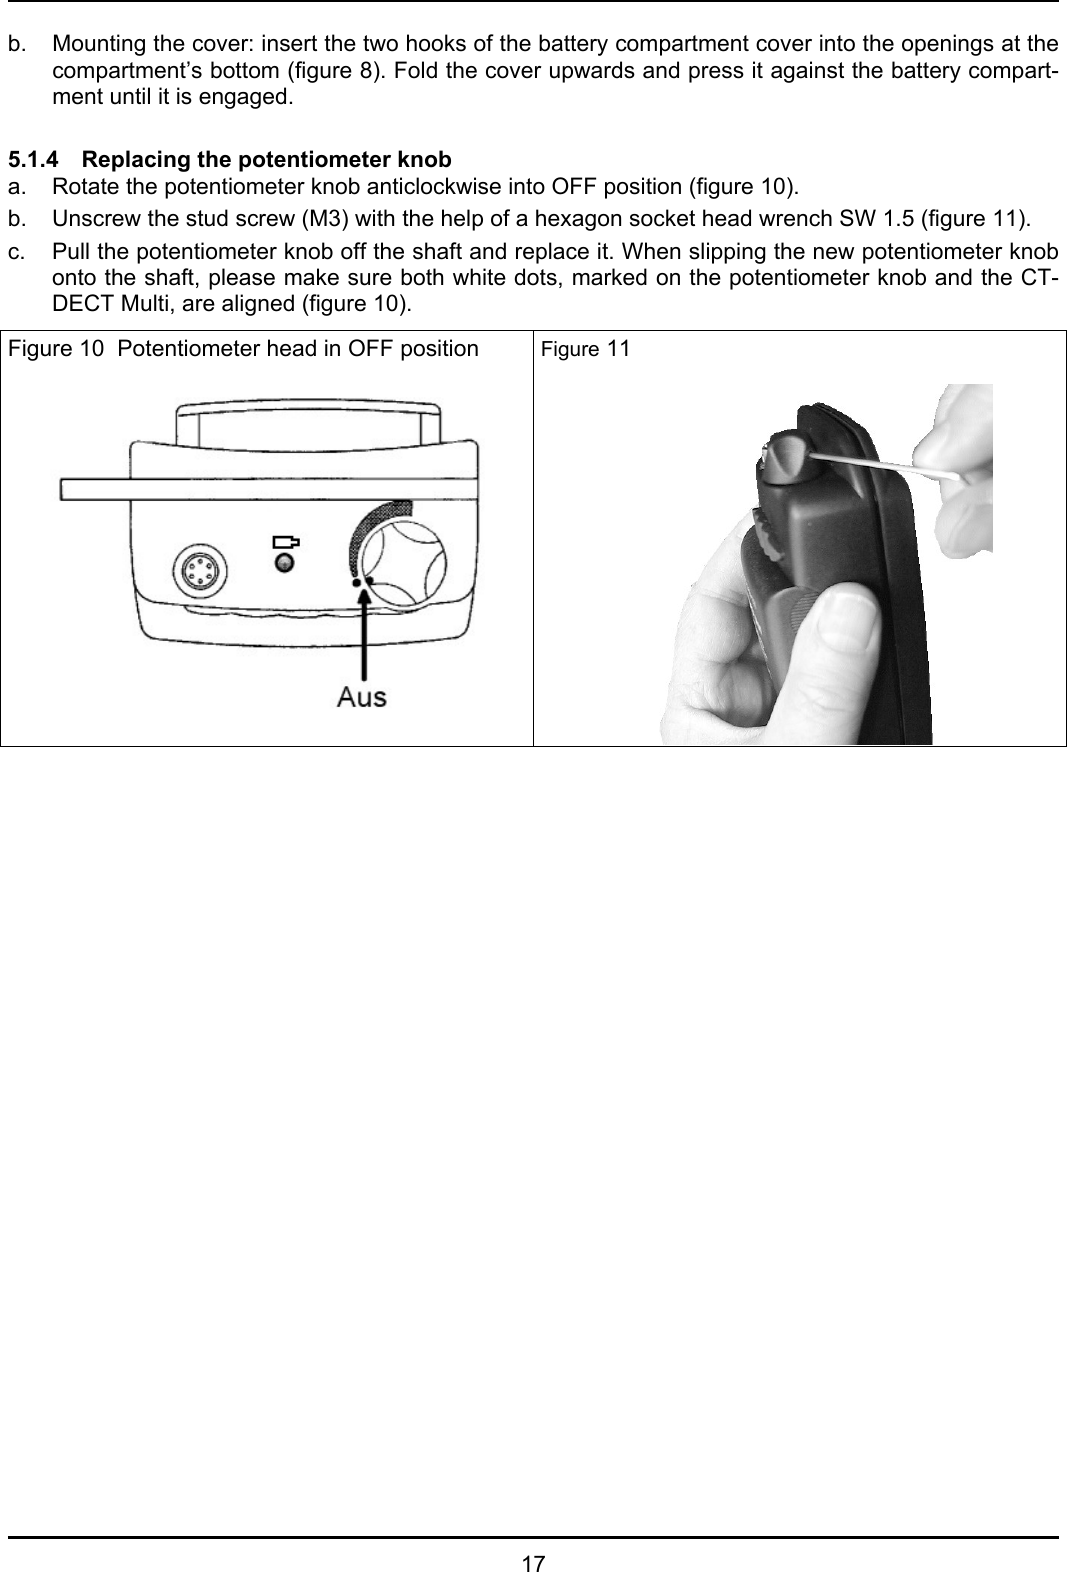   17 b.  Mounting the cover: insert the two hooks of the battery compartment cover into the openings at the compartment’s bottom (figure 8). Fold the cover upwards and press it against the battery compart-ment until it is engaged.   5.1.4   Replacing the potentiometer knob a.  Rotate the potentiometer knob anticlockwise into OFF position (figure 10). b.  Unscrew the stud screw (M3) with the help of a hexagon socket head wrench SW 1.5 (figure 11). c.  Pull the potentiometer knob off the shaft and replace it. When slipping the new potentiometer knob onto the shaft, please make sure both white dots, marked on the potentiometer knob and the CT-DECT Multi, are aligned (figure 10). Figure 10  Potentiometer head in OFF position    Figure 11 